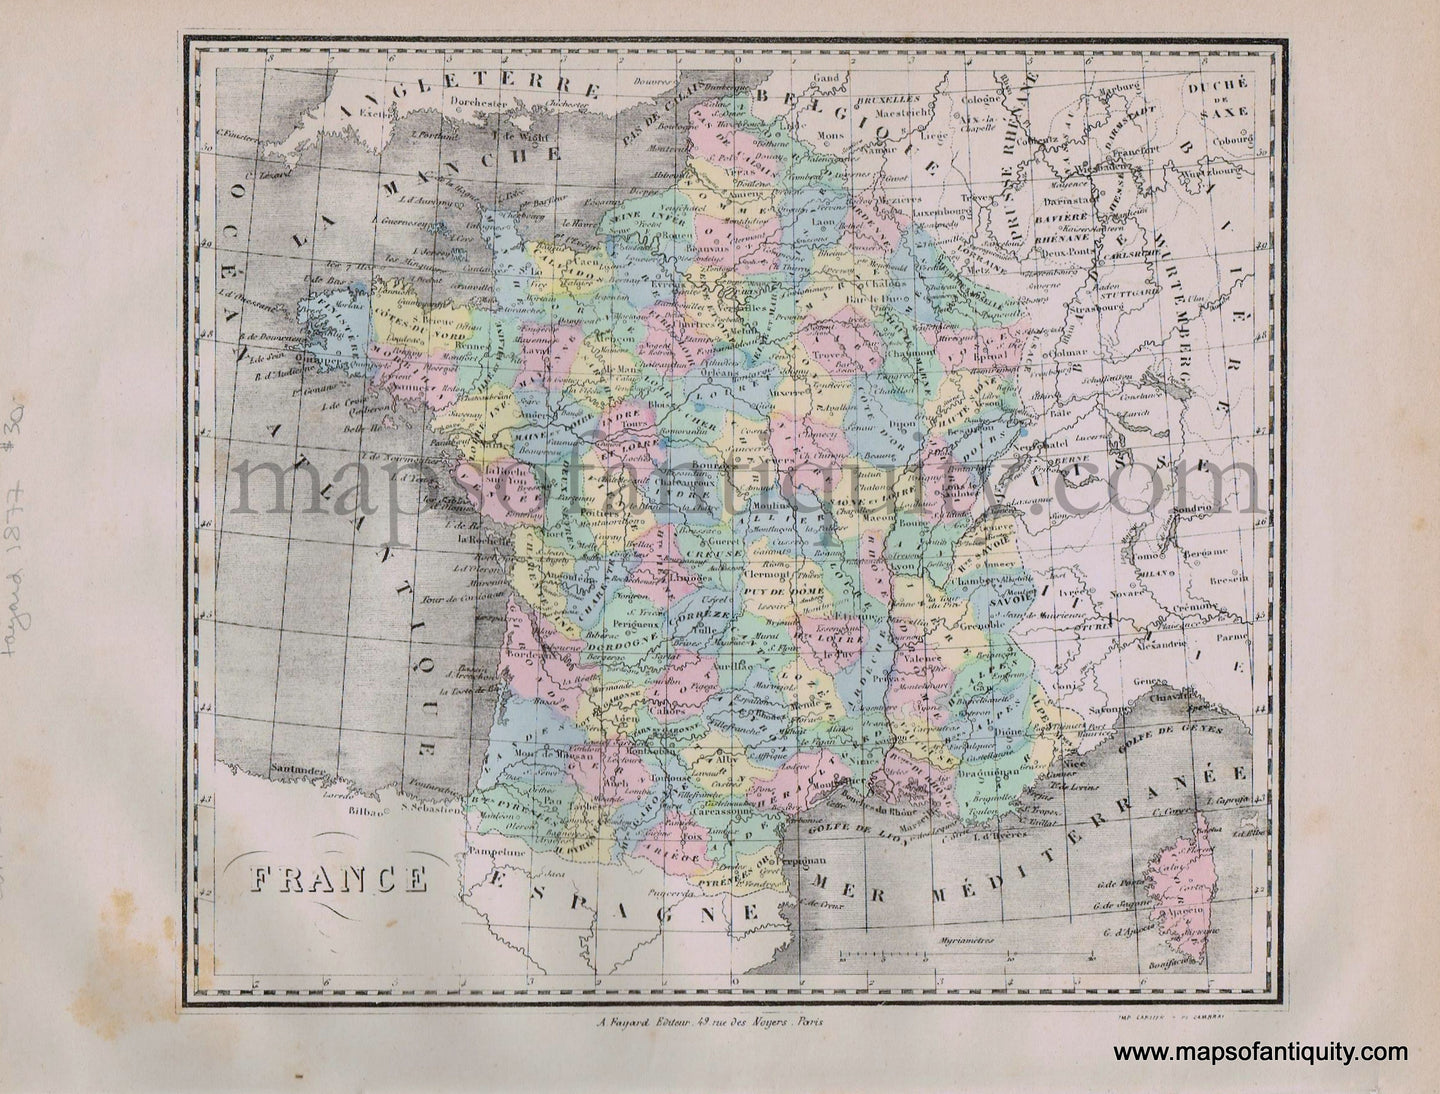 Antique-Printed-Color-Map-Europe-France--1877-Fayard-France-1800s-19th-century-Maps-of-Antiquity